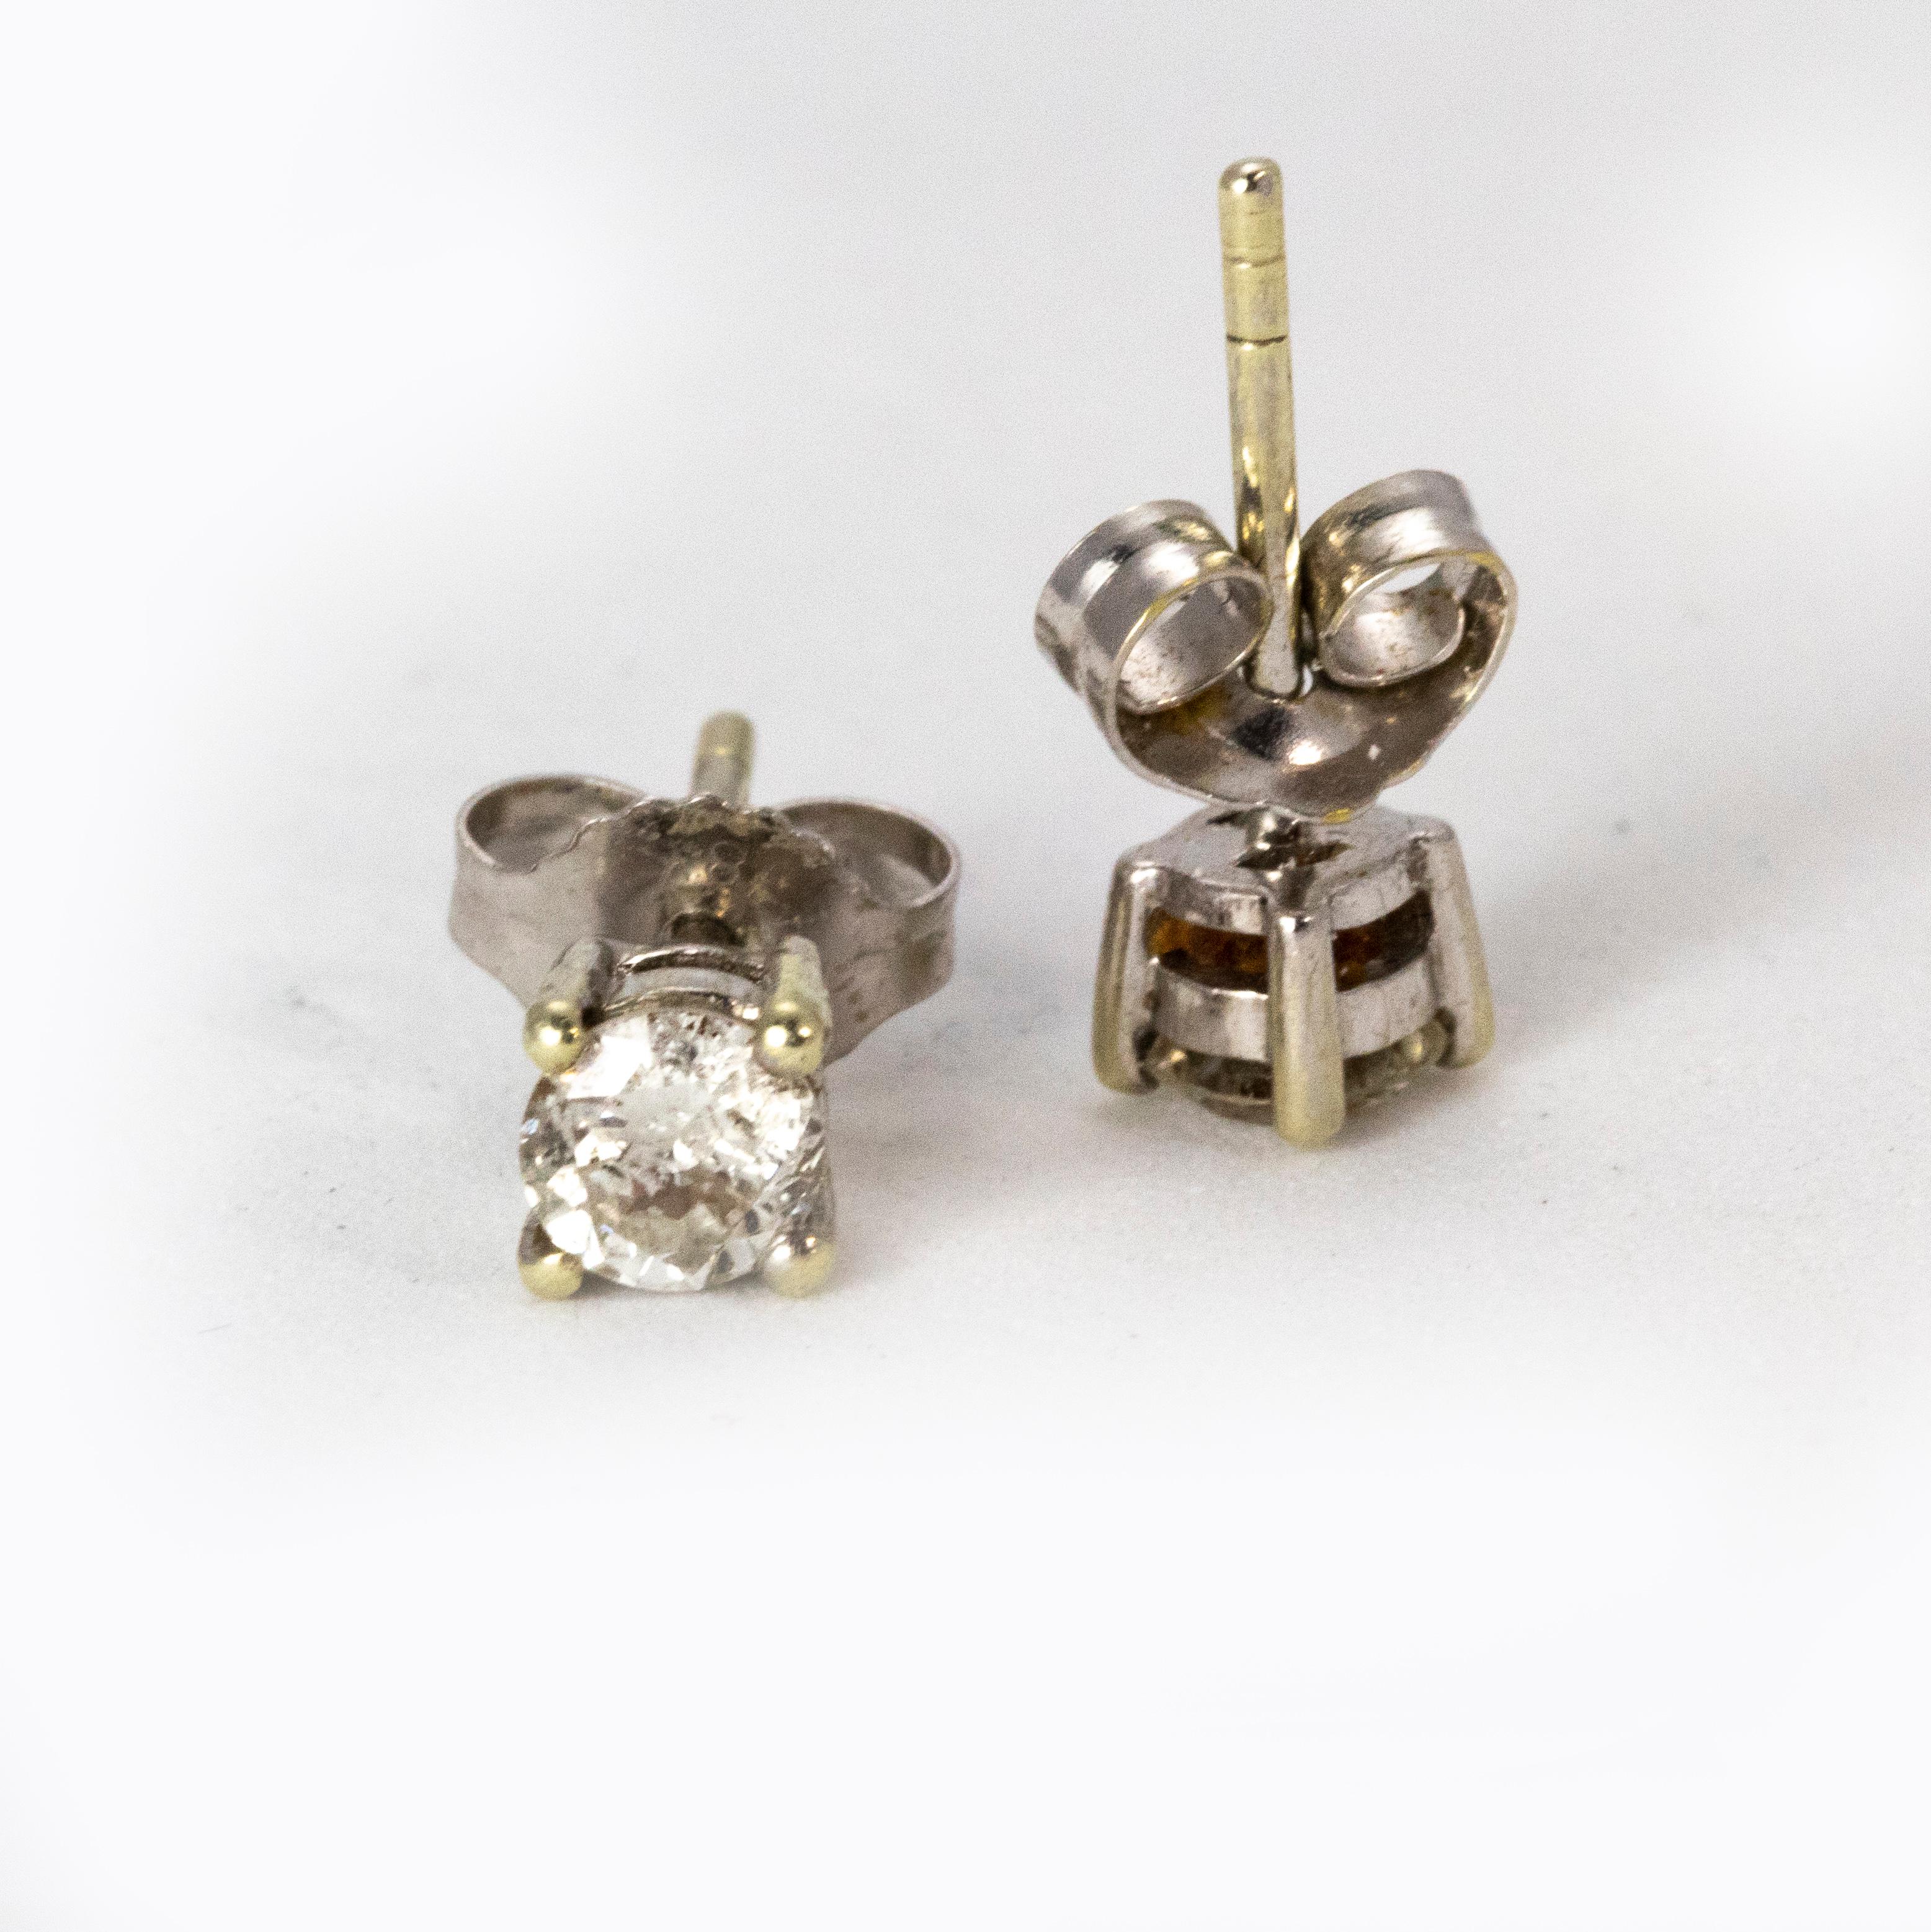 A pretty pair of diamond stud earrings, with a total diamond rate of 0.5 carats. Each stud is four claw set in 18k white gold. On a post and butterfly fitting.
